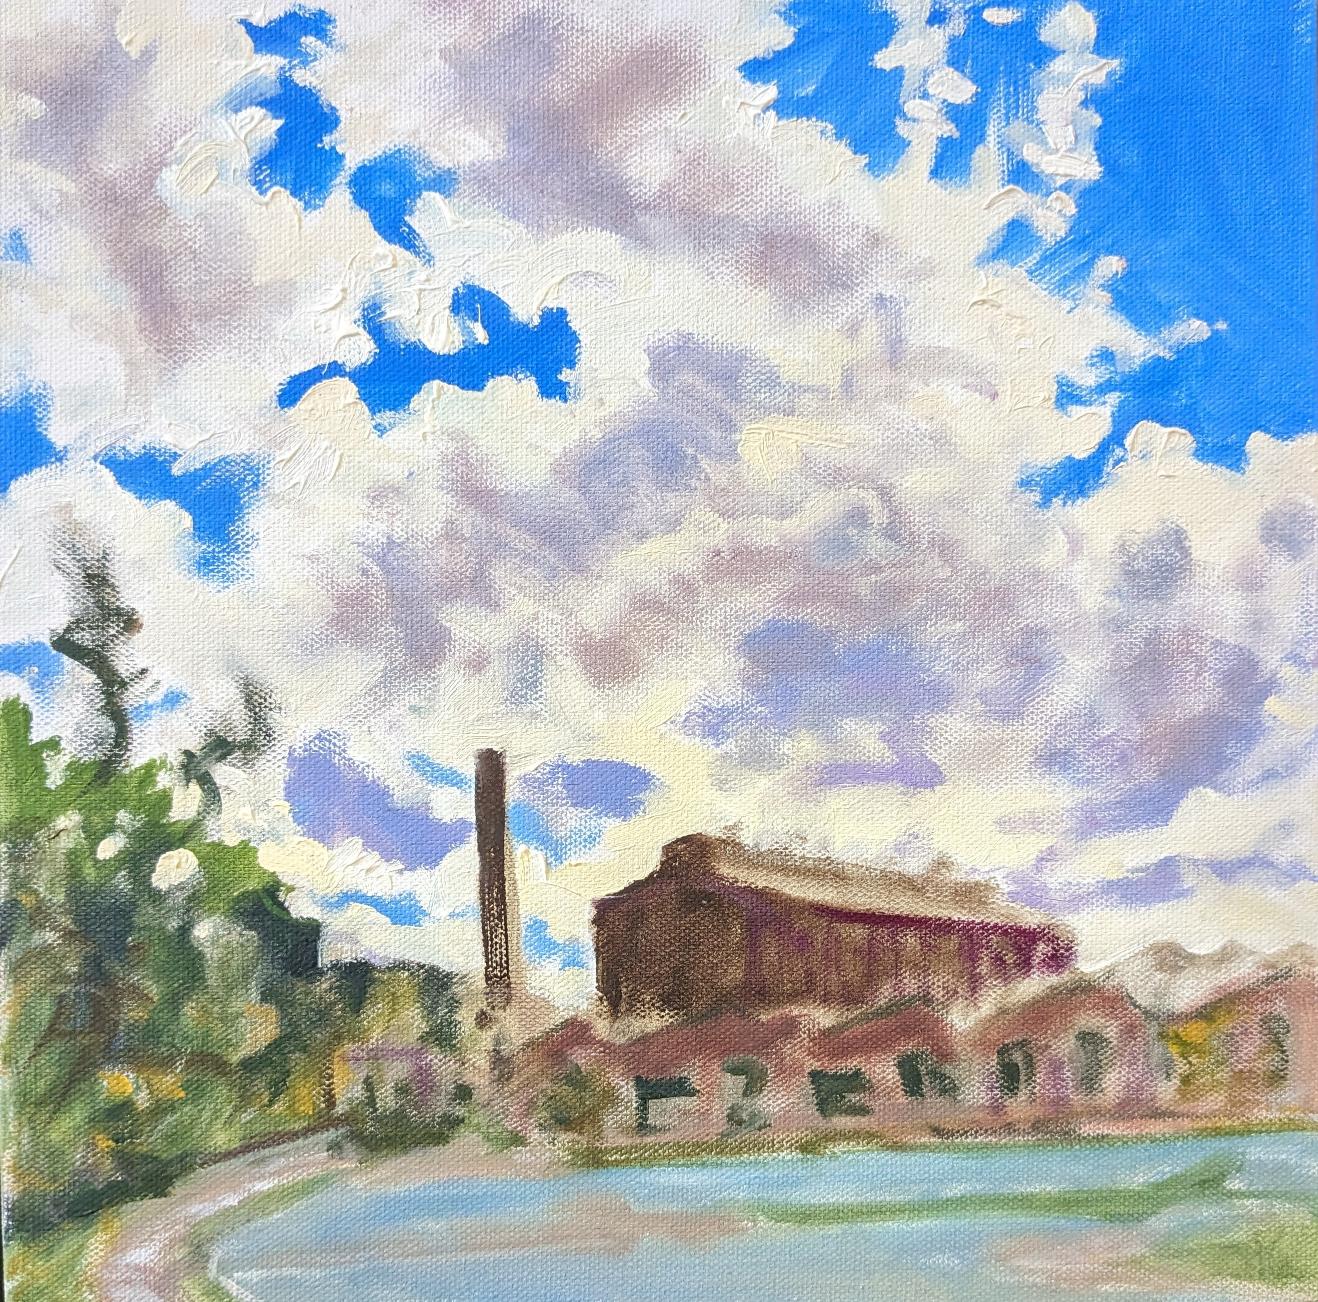 A plein air painting by John McNally of the Silk complex  by  the Karl Stirner Arts Trail in Easton, Pennsylvania